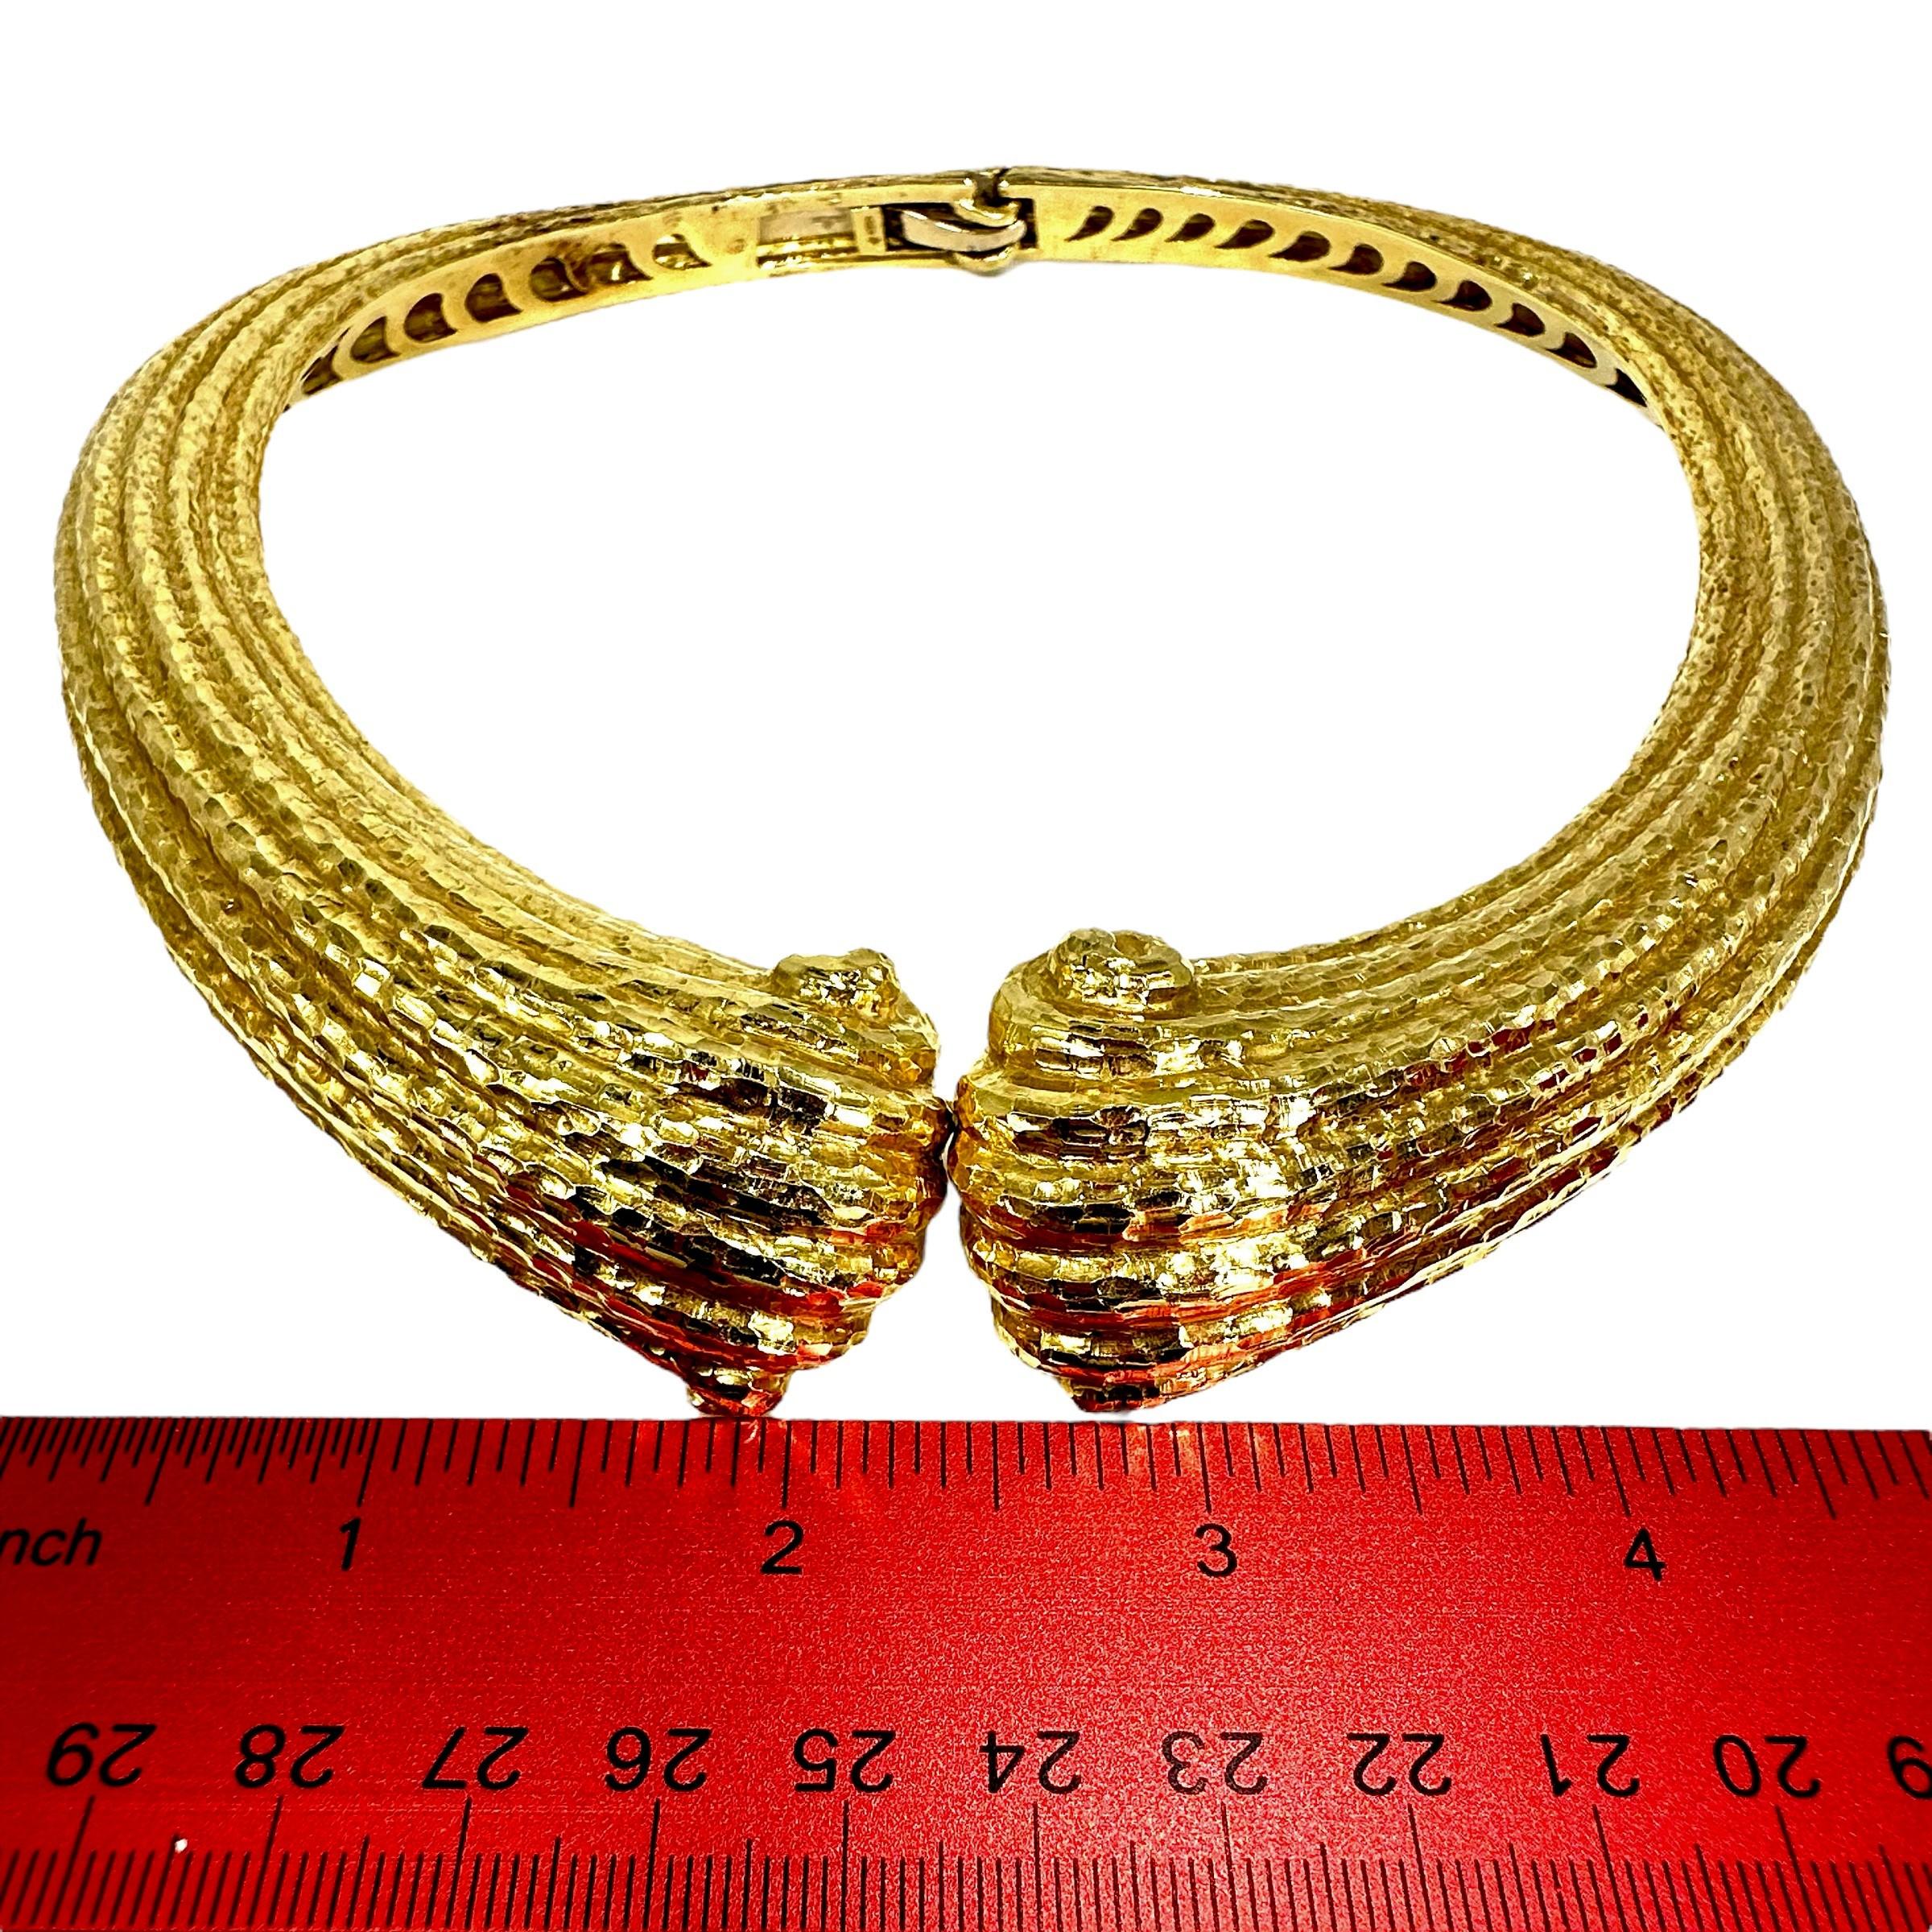 Massive 18K Yellow Gold, Hammered Finish, Italian Scroll Motif Choker Necklace For Sale 4